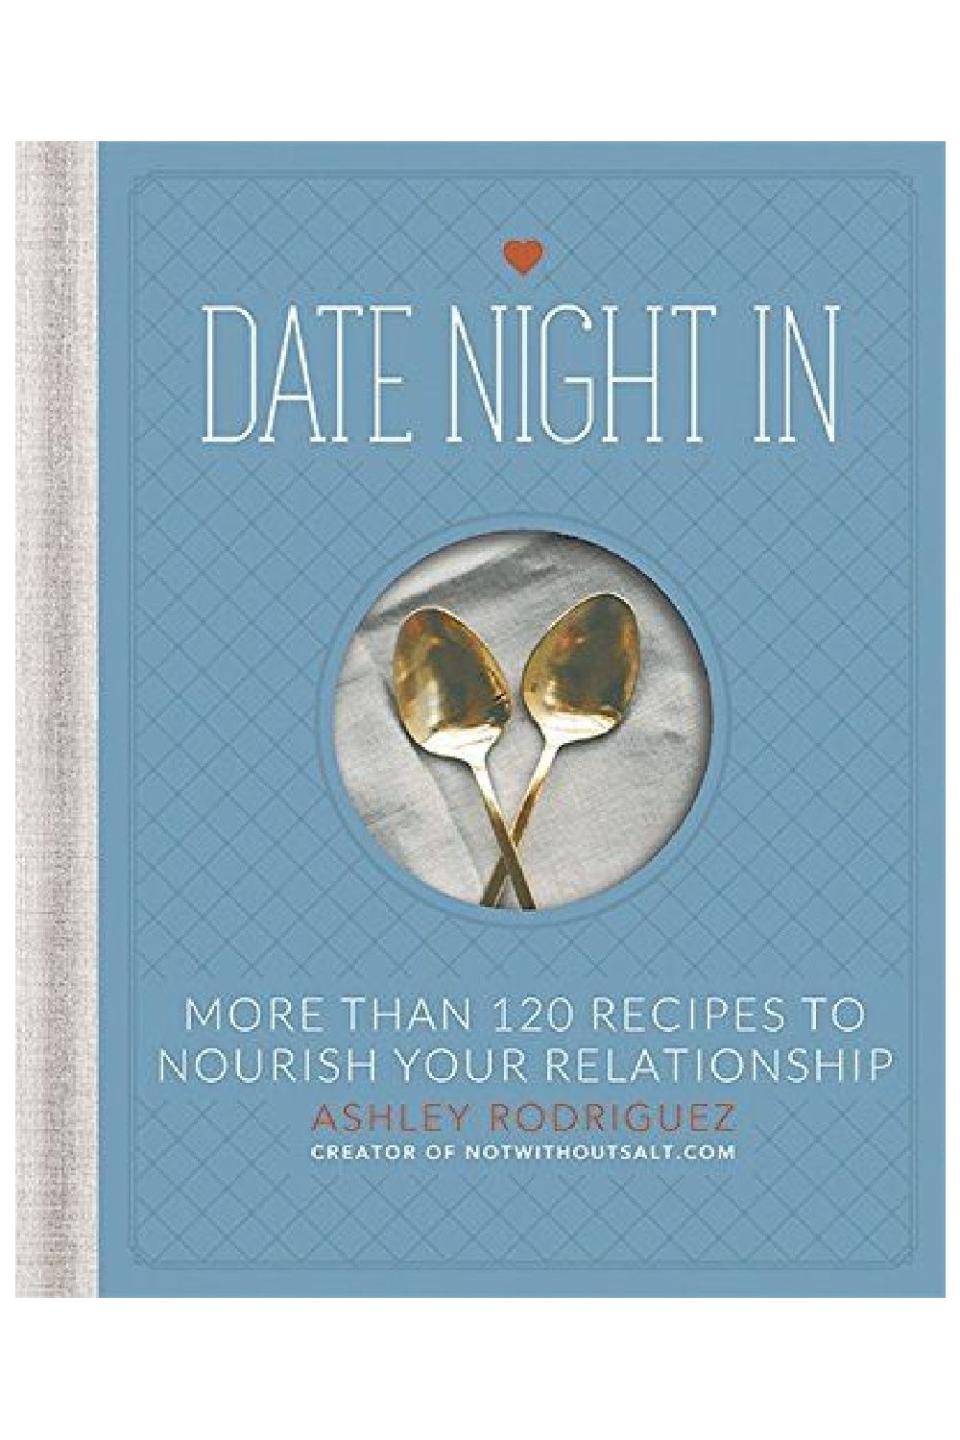 34) ‘Date Night In: More than 120 Recipes to Nourish Your Relationship’